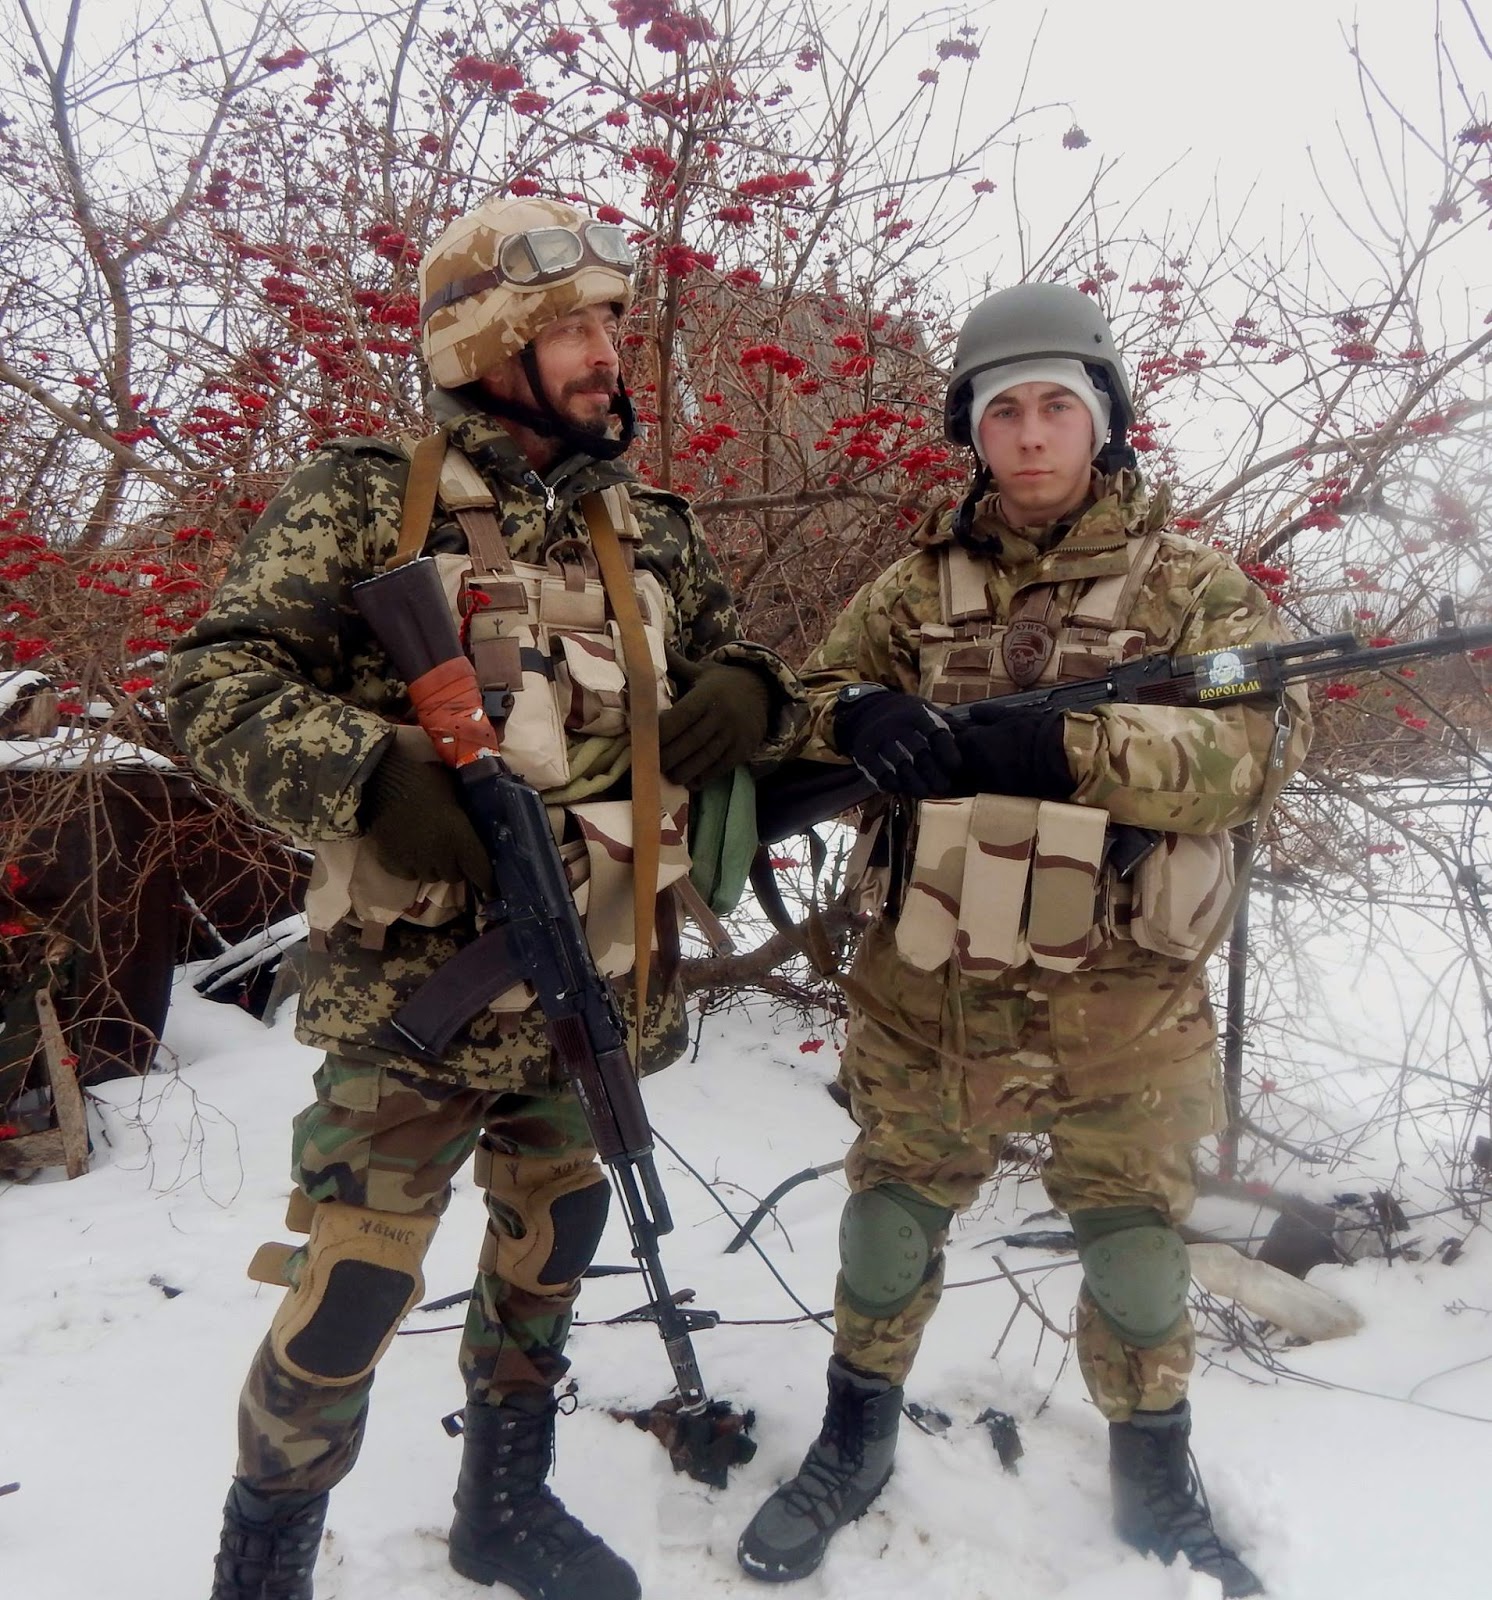 Father and son at the frontline, the family story of Ukrainian nationalism